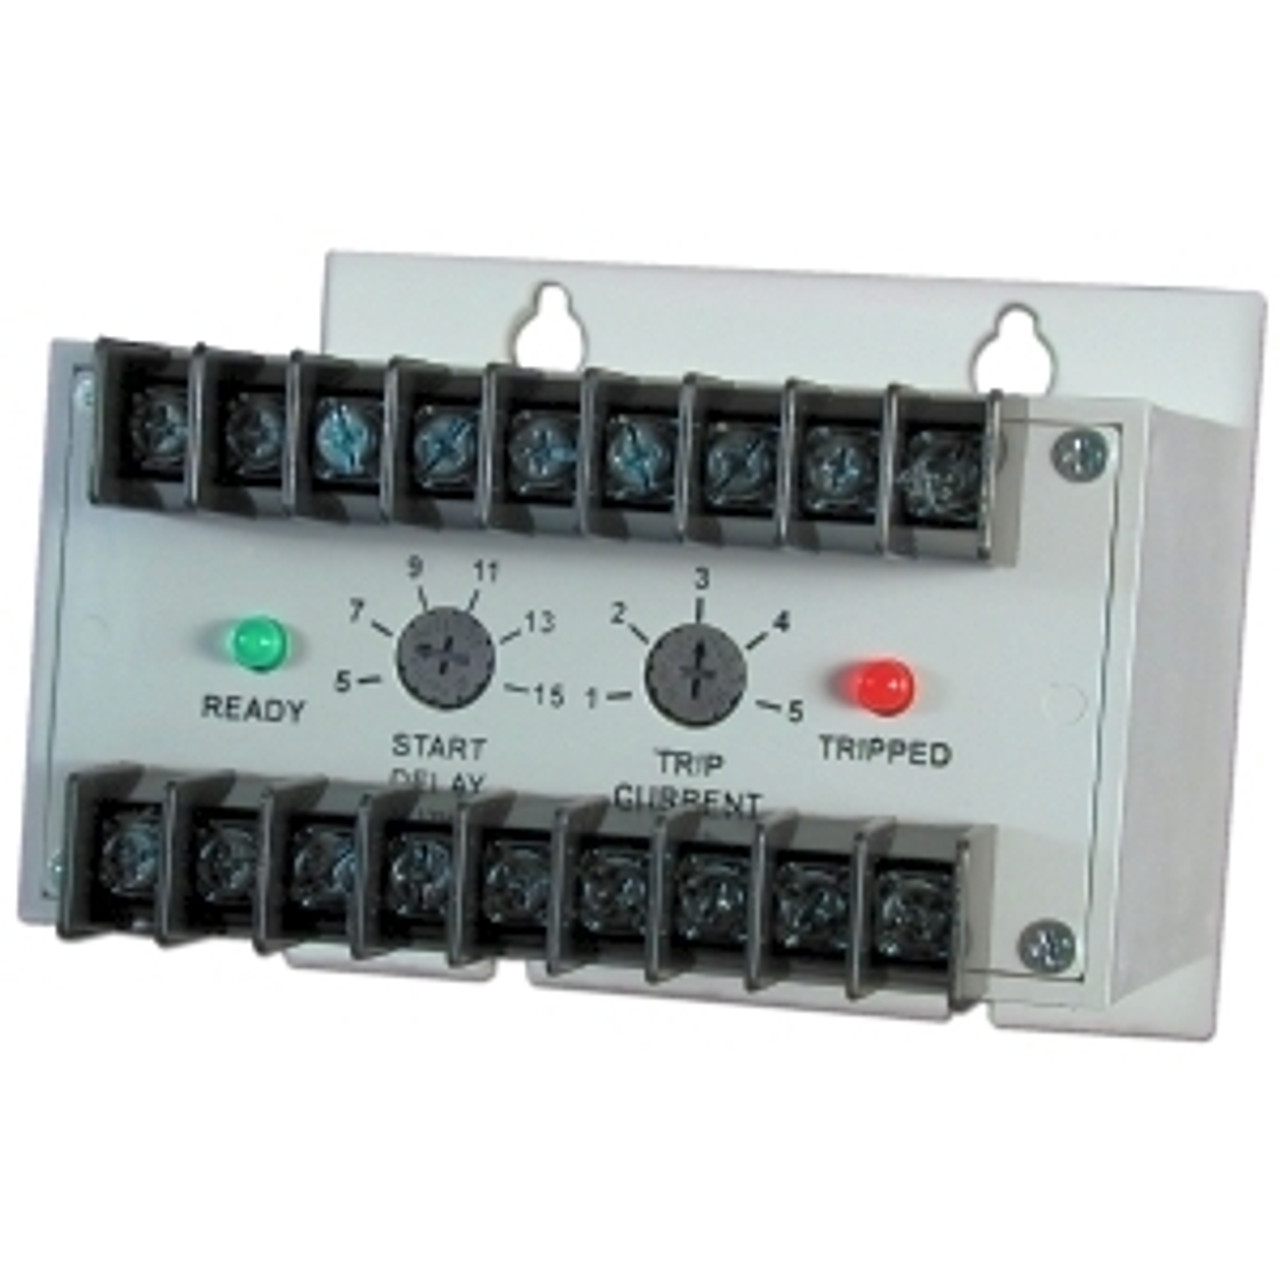 TimeMark 2744-24 Current Monitor Relays